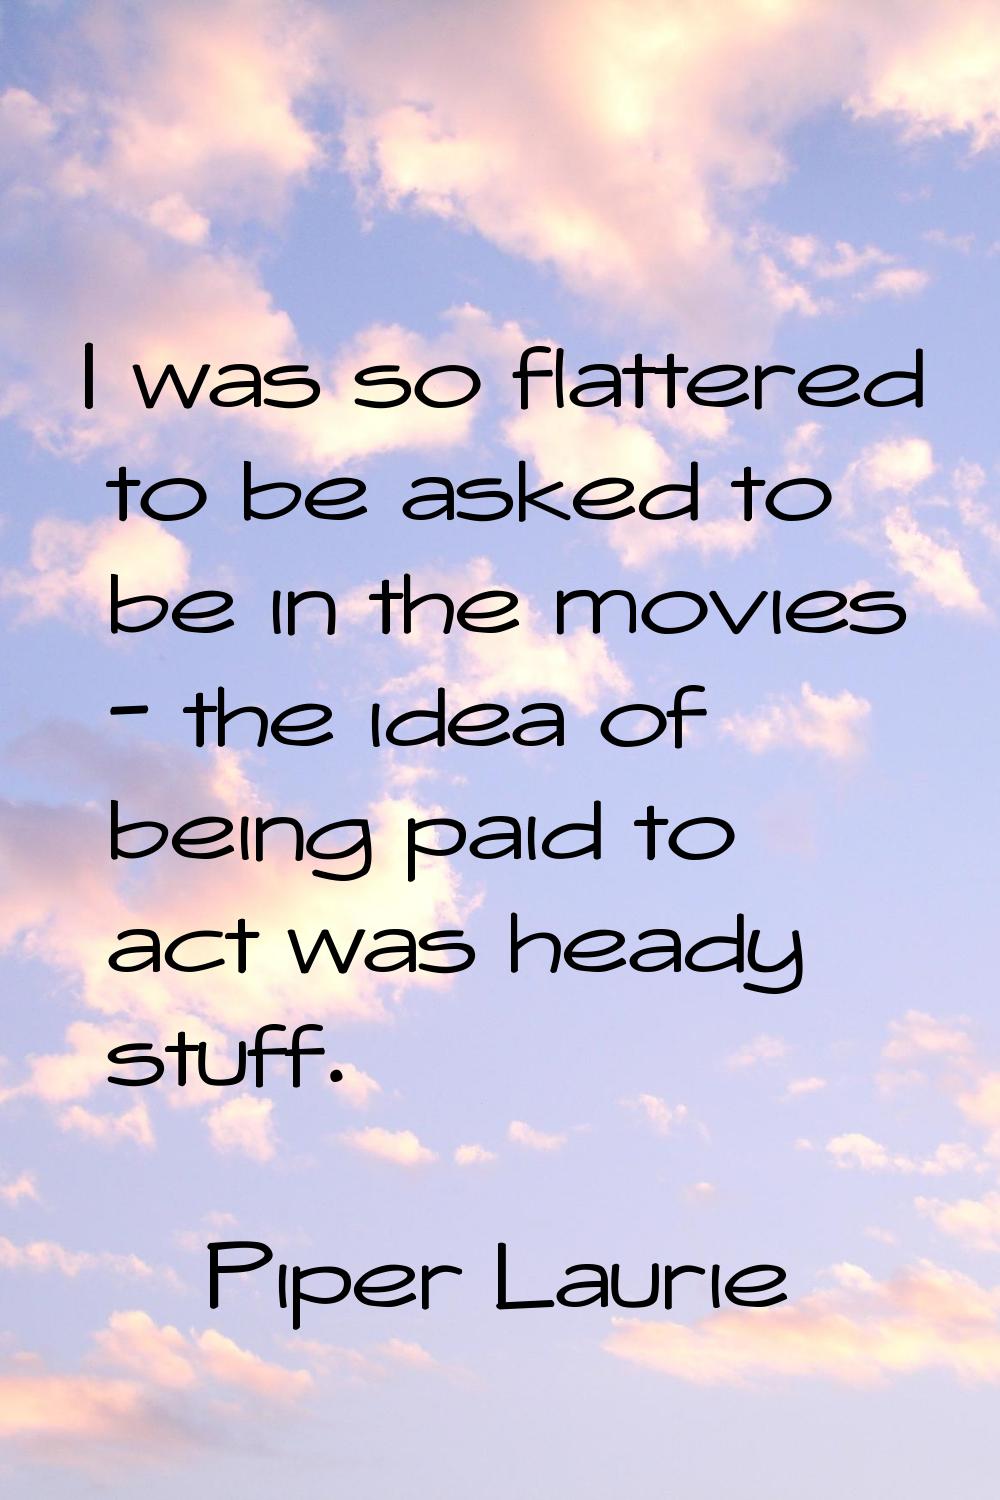 I was so flattered to be asked to be in the movies - the idea of being paid to act was heady stuff.